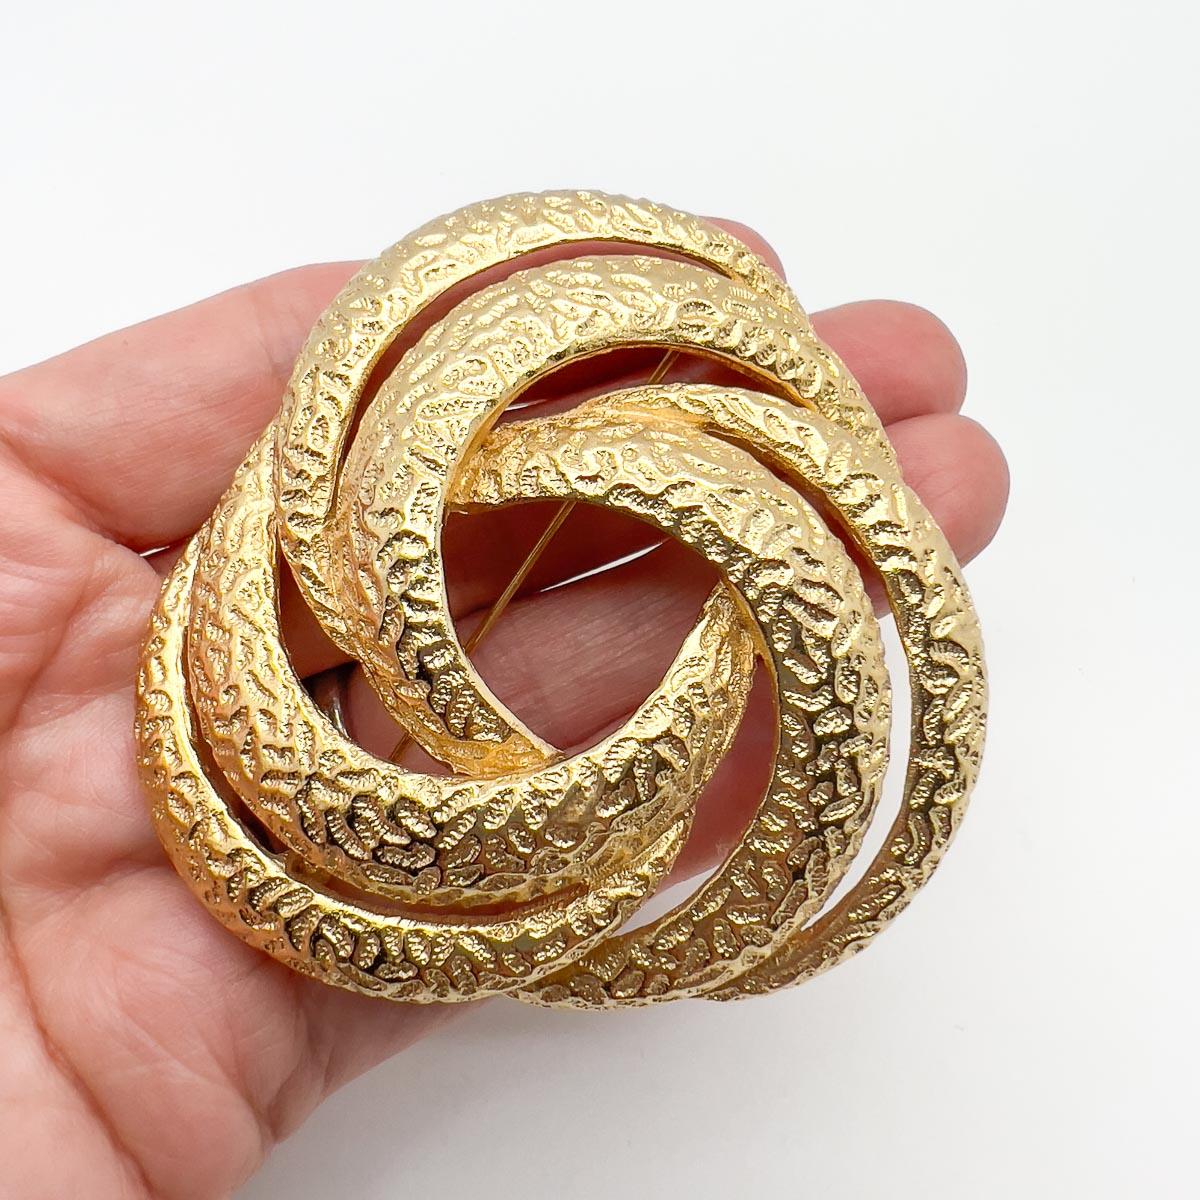 Vintage Christian Dior Grande Embellished Knot Brooch 1980s In Good Condition For Sale In Wilmslow, GB